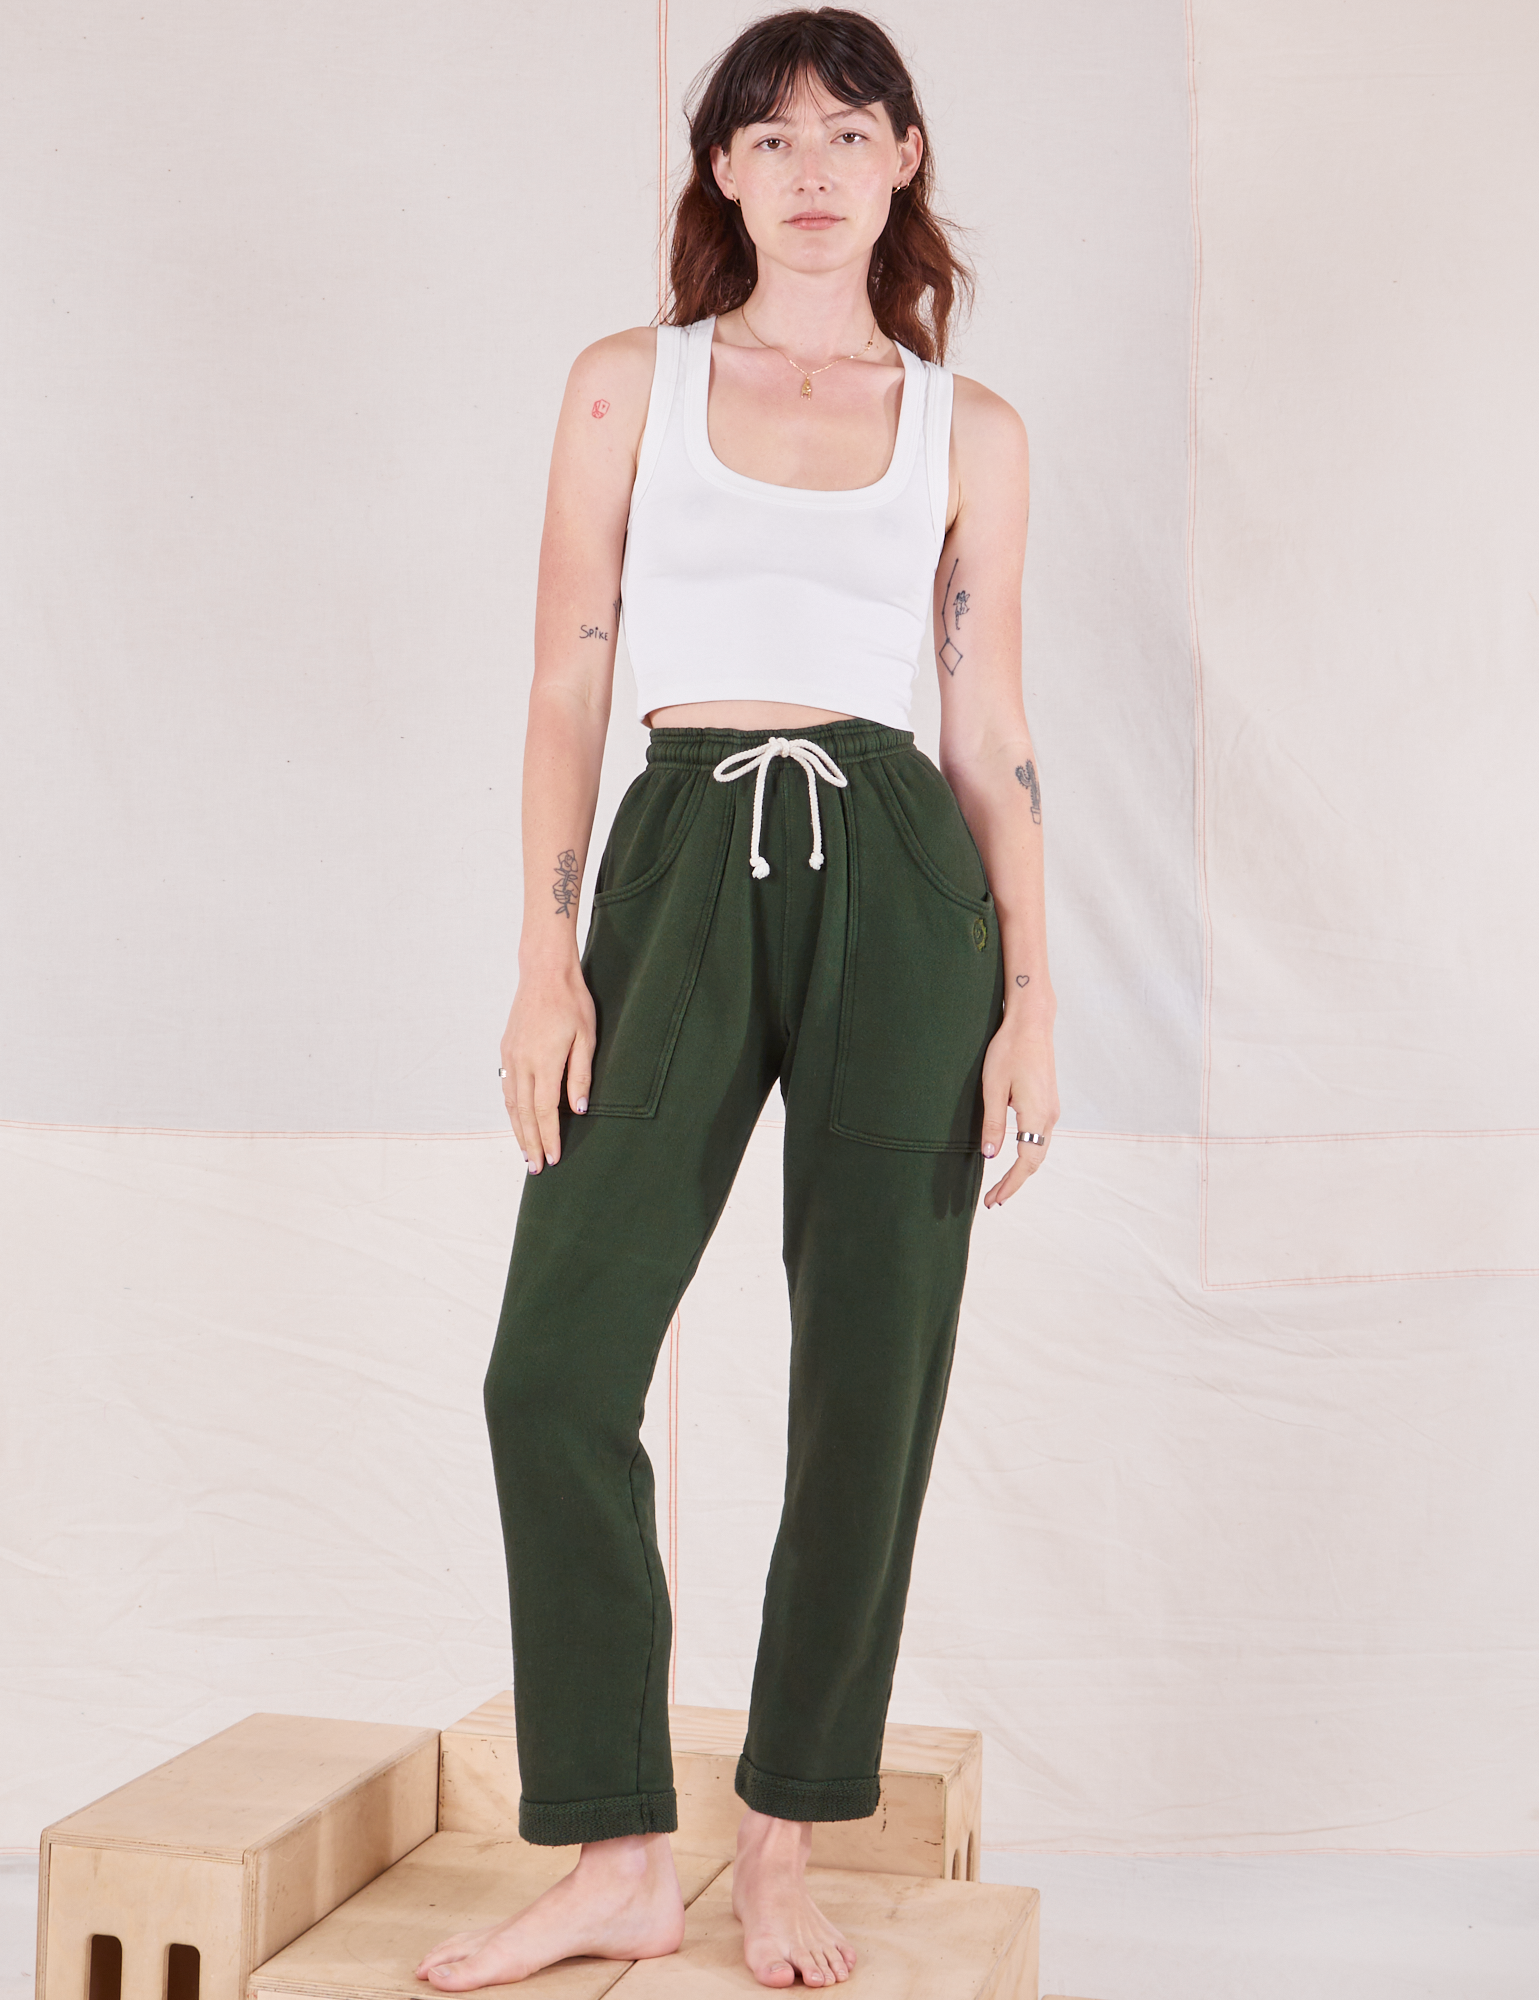 Alex is 5&#39;8&quot; and wearing P Rolled Cuff Sweat Pants in Swamp Green paired with Cropped Tank in vintage tee off-white